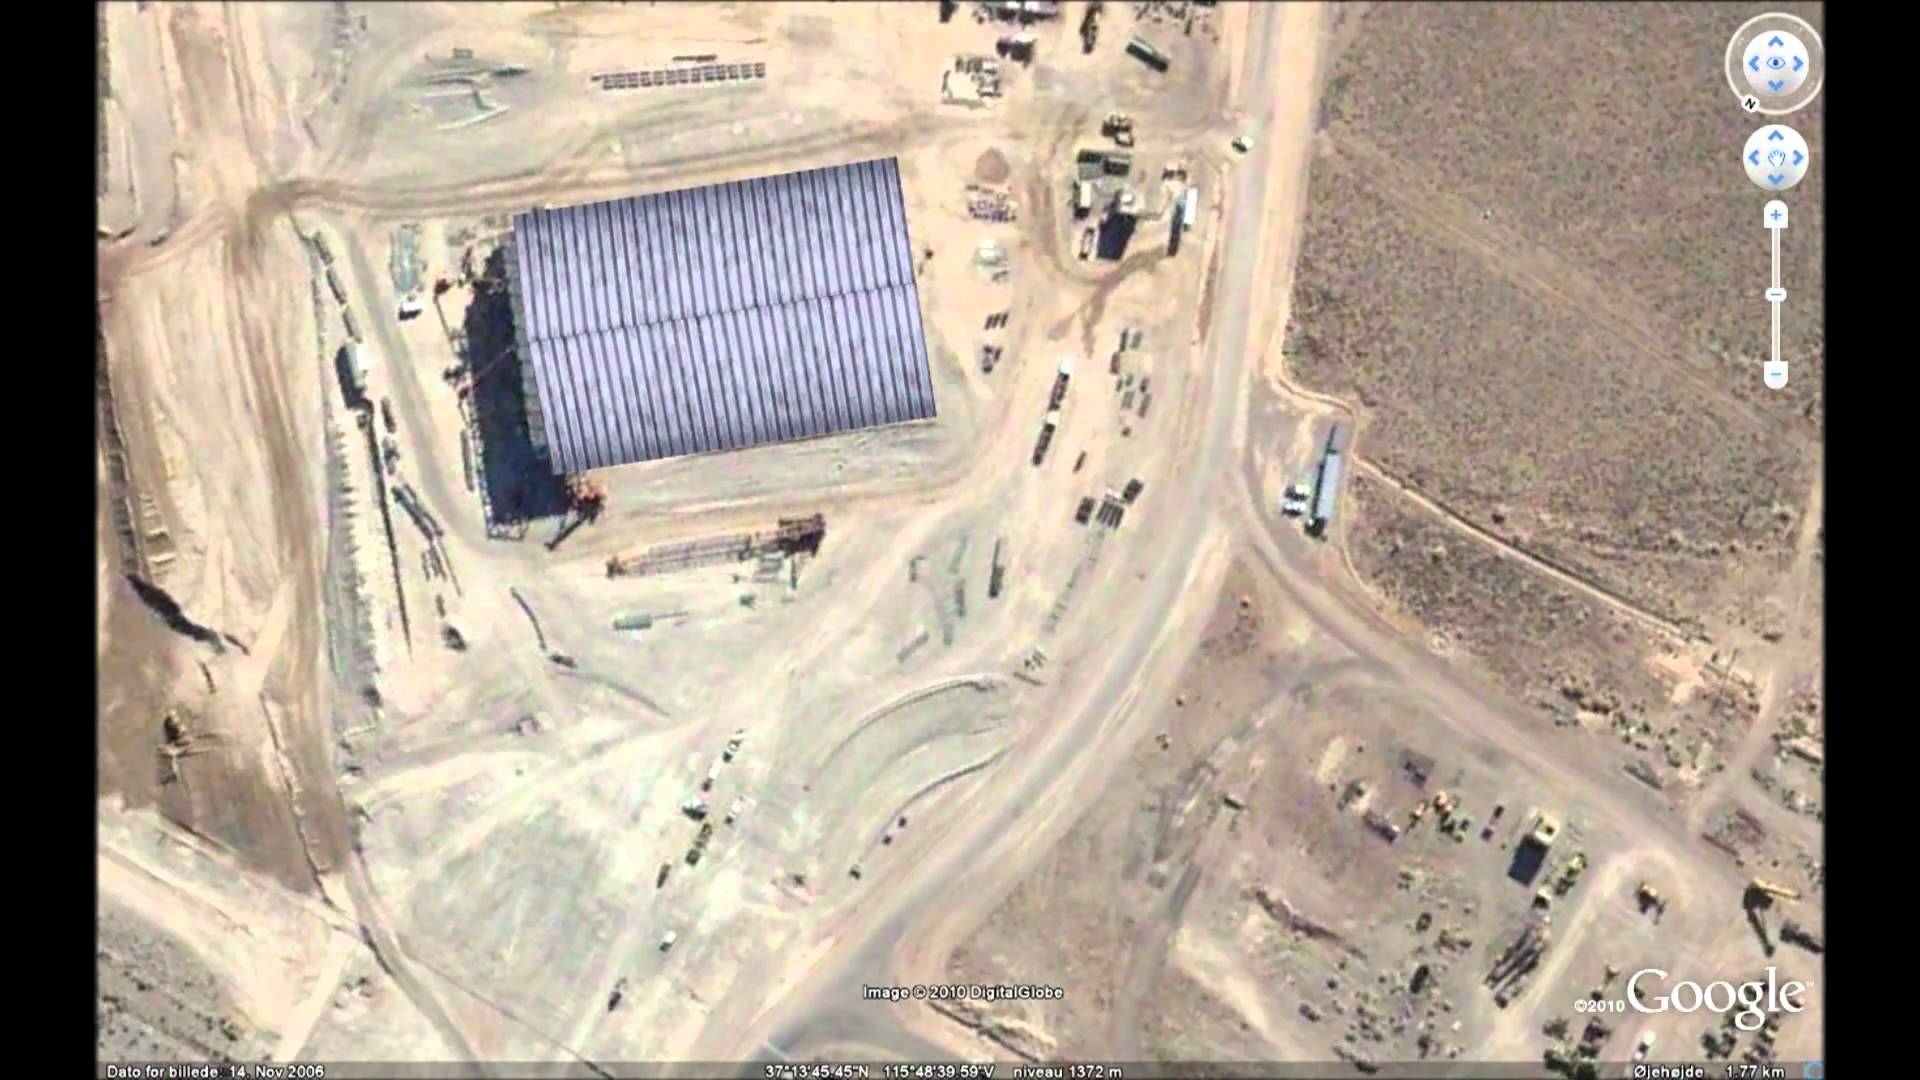 New hangar at Area 51. (UPDATE: NOW IN 3D) - YouTube